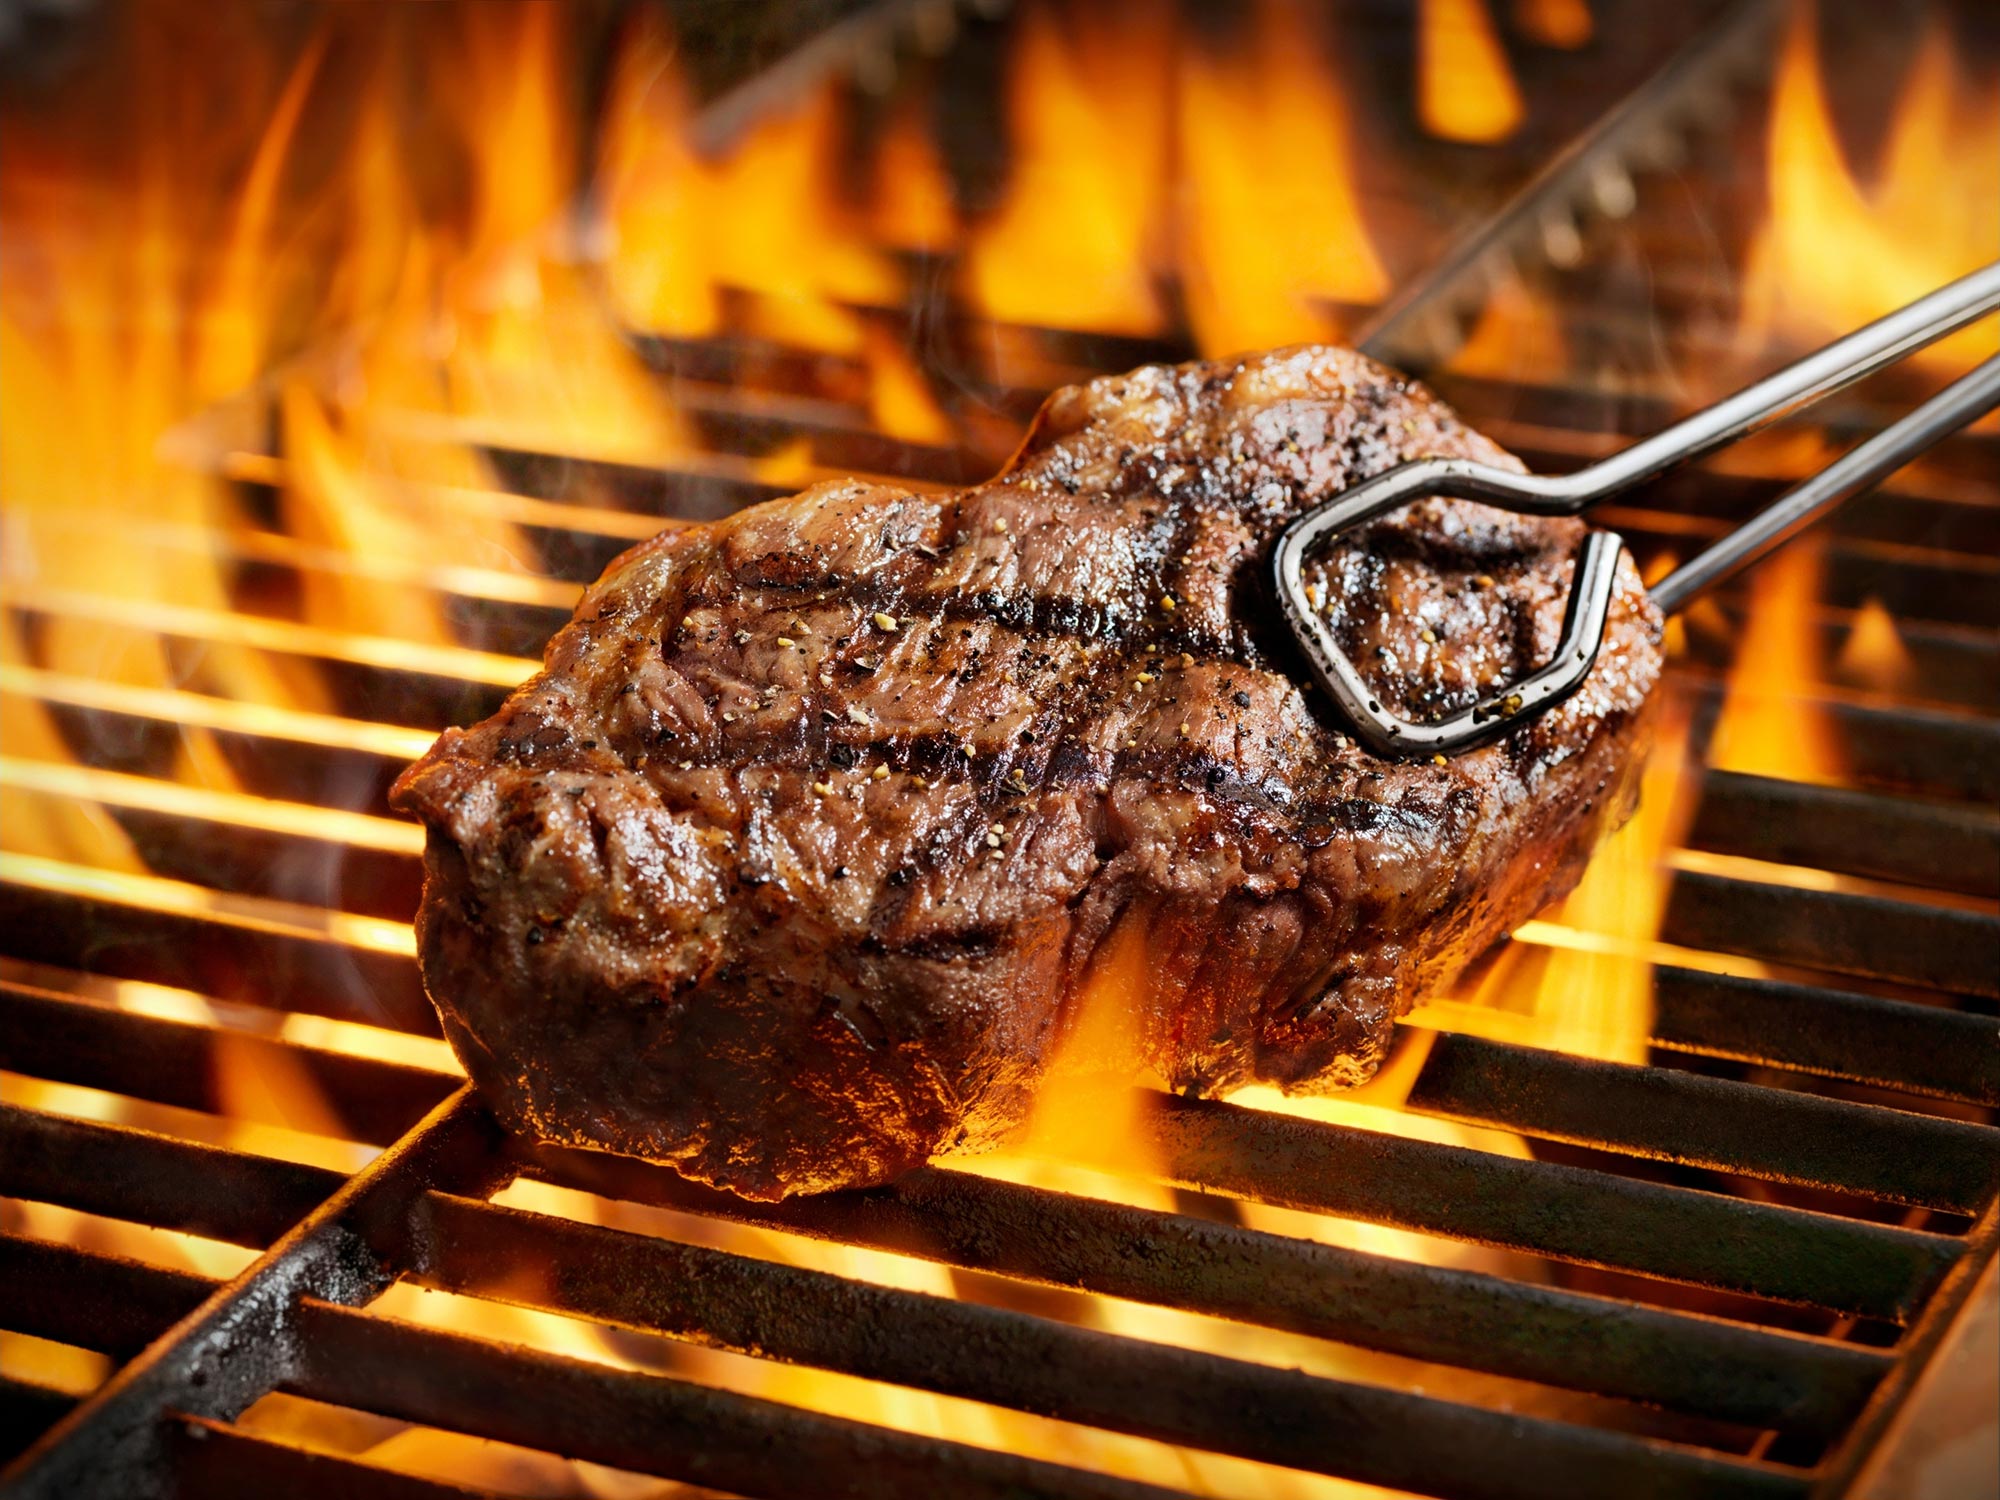 https://scitechdaily.com/images/BBQ-Grilled-Steak.jpg